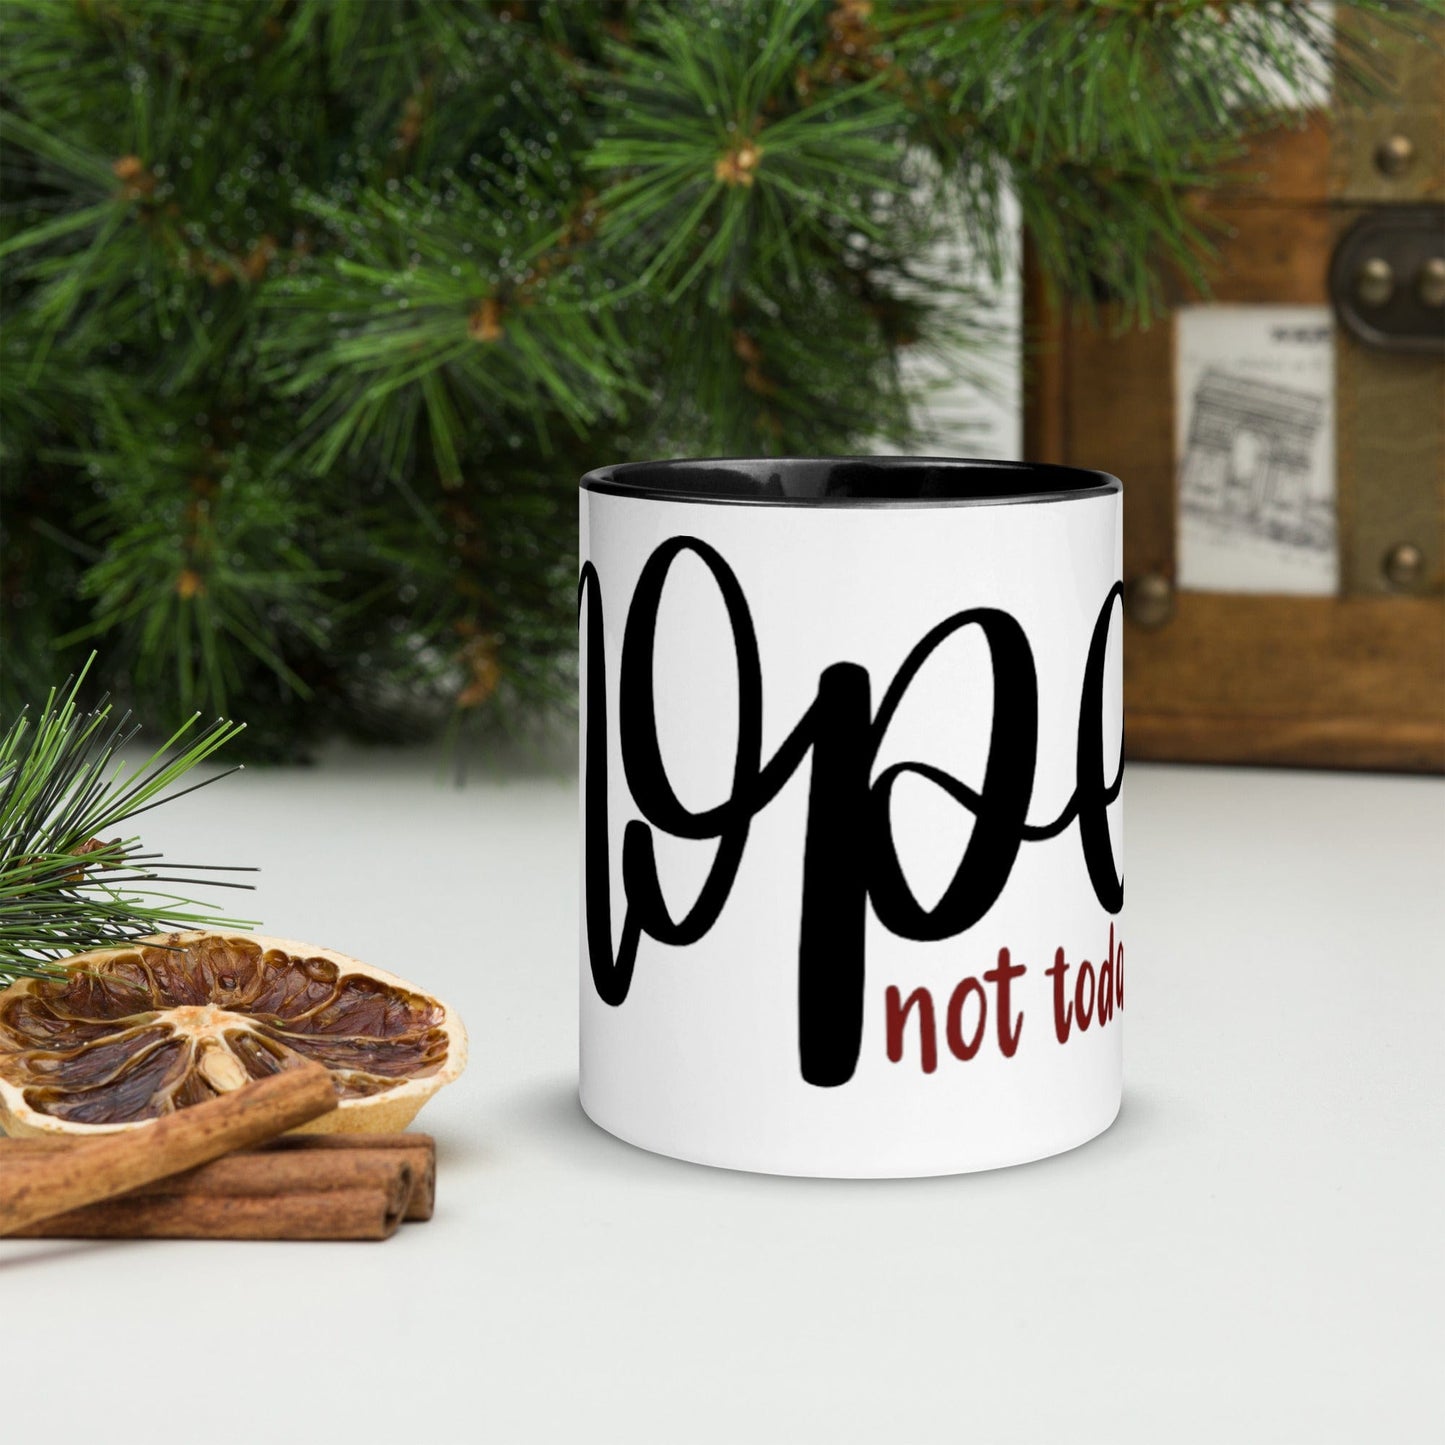 Michelle's Creatives Nope Not Today Coffee Mug - Choose Your Color 2151448_11051